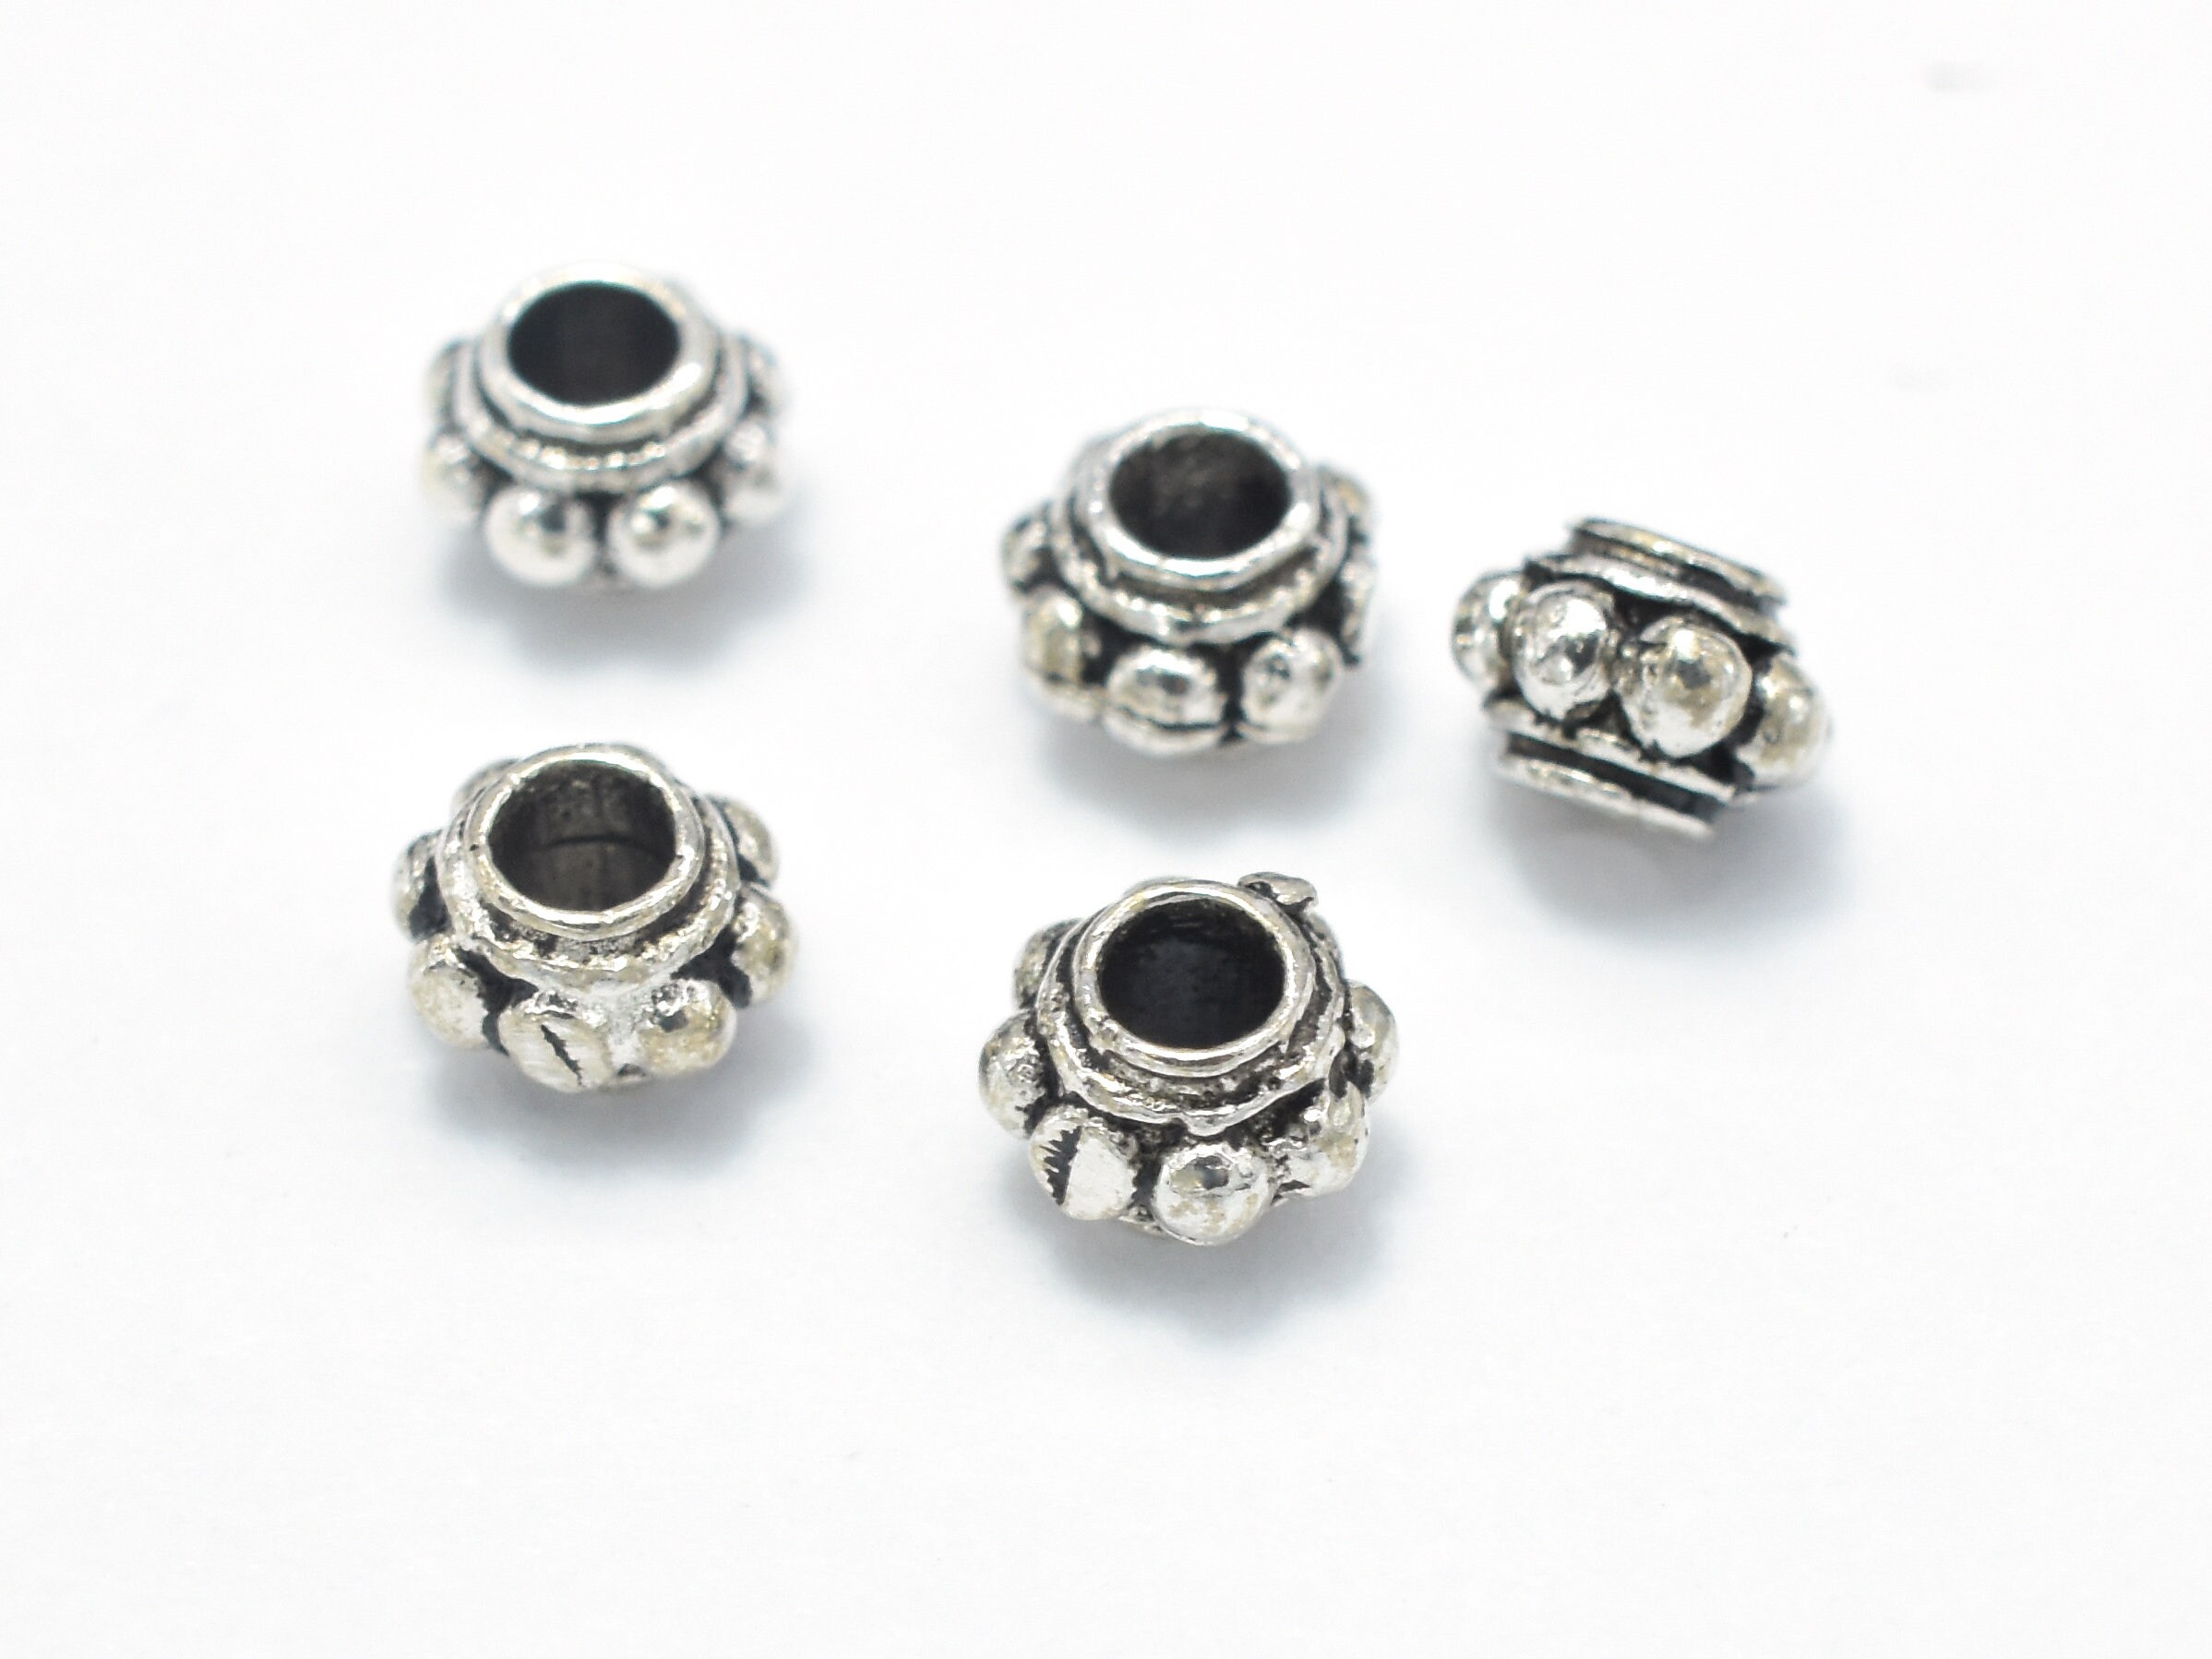 5 Pcs 5.3x2.8 mm Sterling Silver Rondelle Donut Spacer Beads